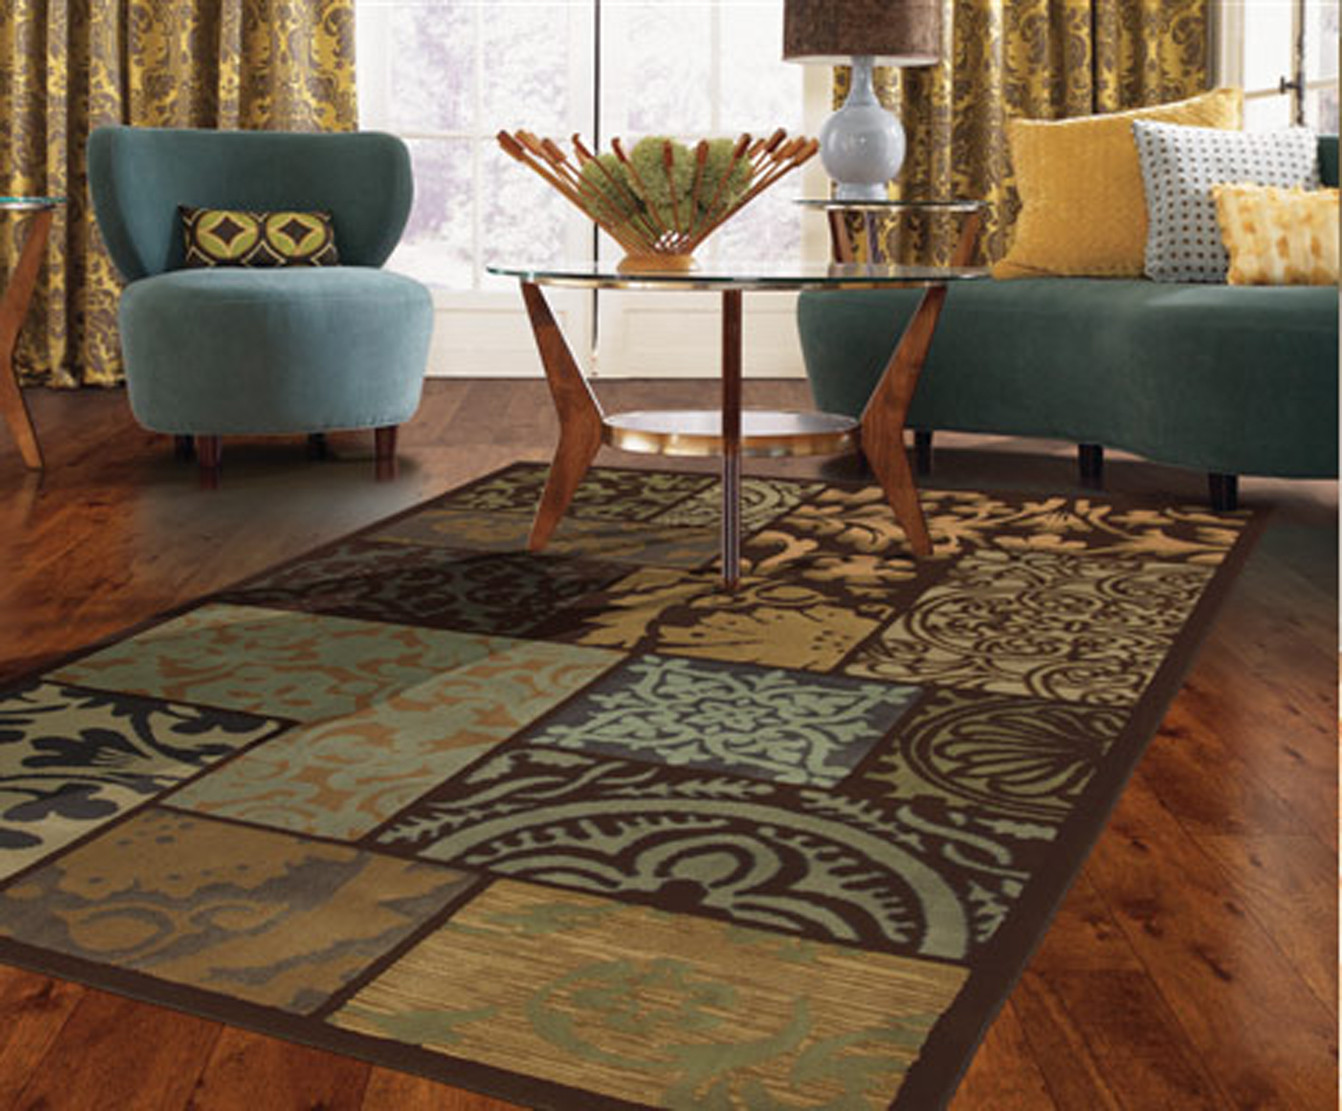 Lowes Living Room Rugs
 Floor How To Decorate Cool Flooring With Lowes Area Rugs